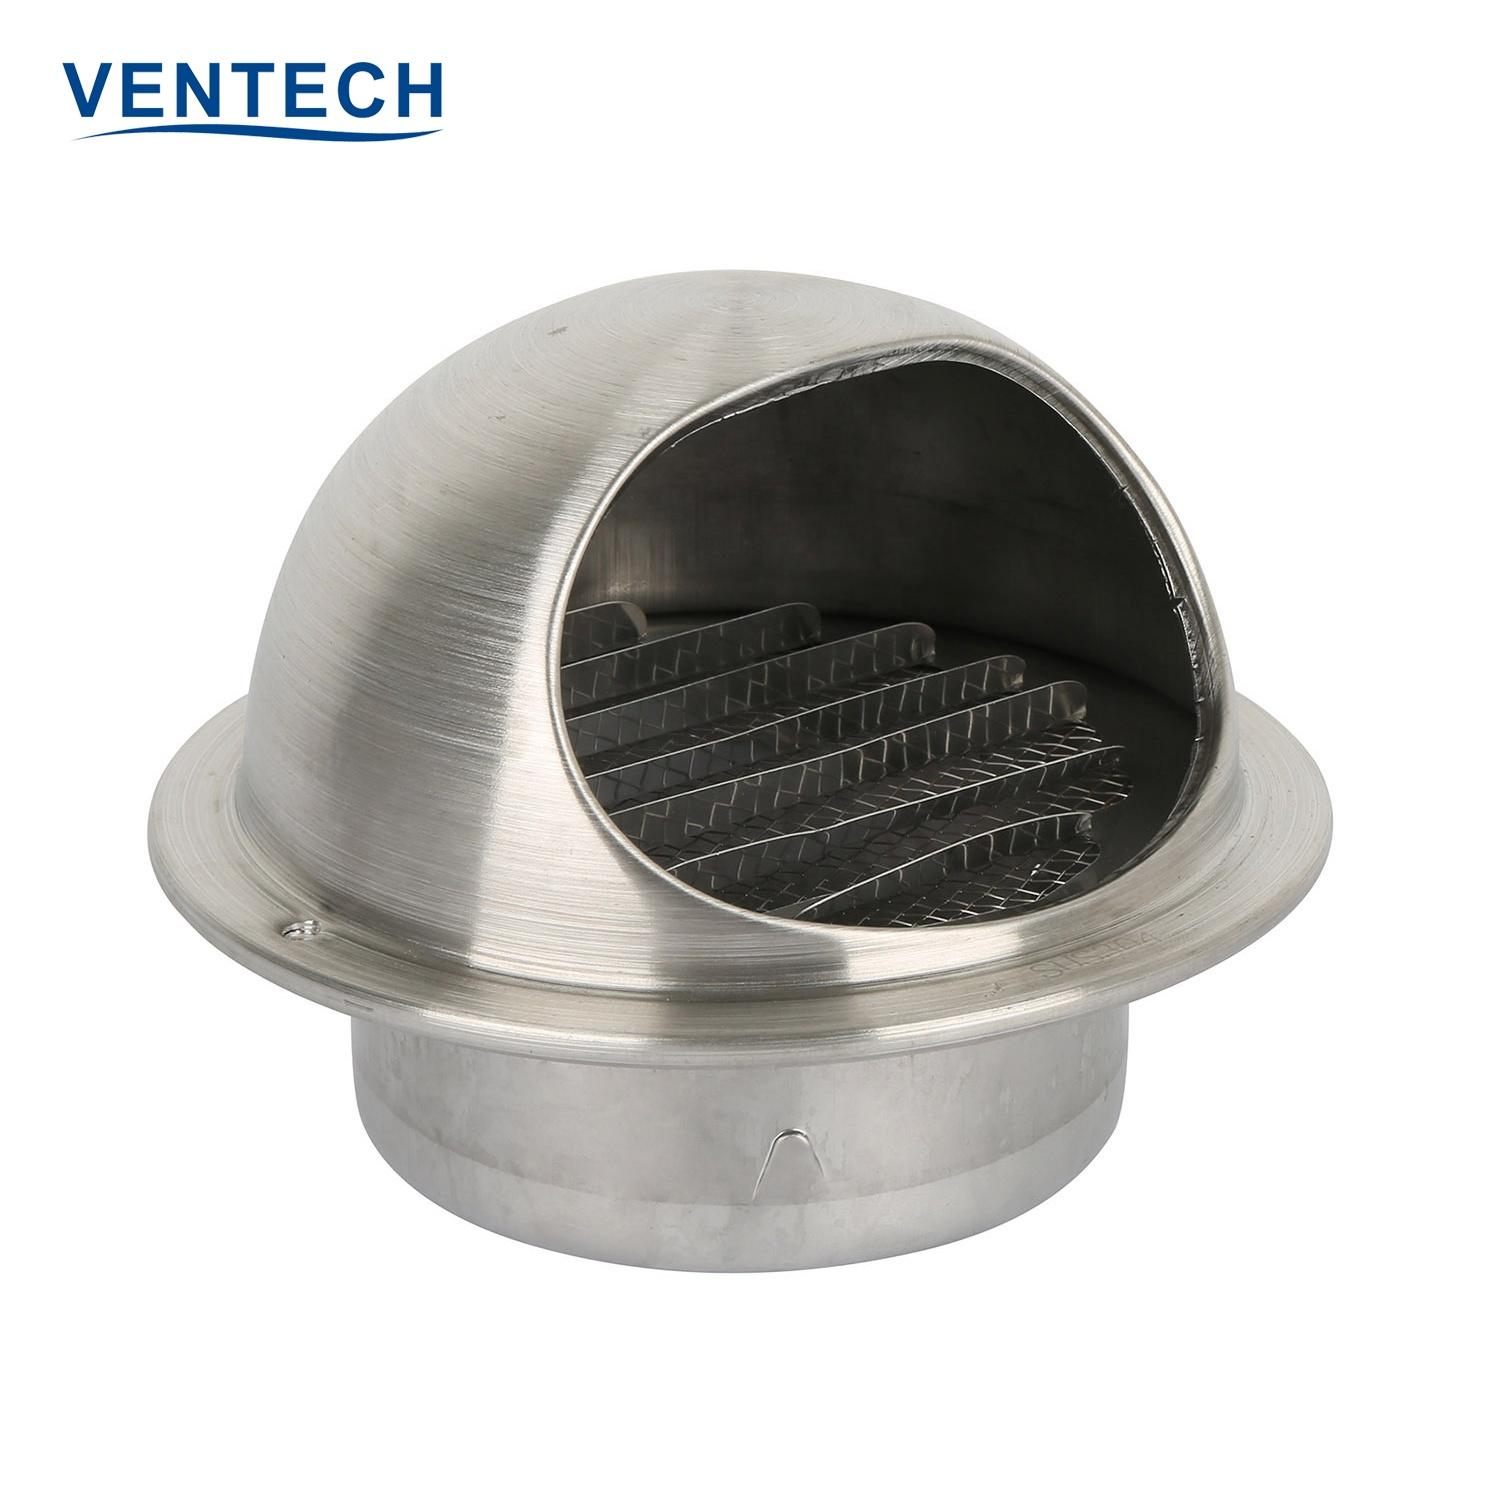 Ventech Air Diffuser Louver Ball Weather Louver Adjustable Vent Cap Air Vents Stainless For Ventilation